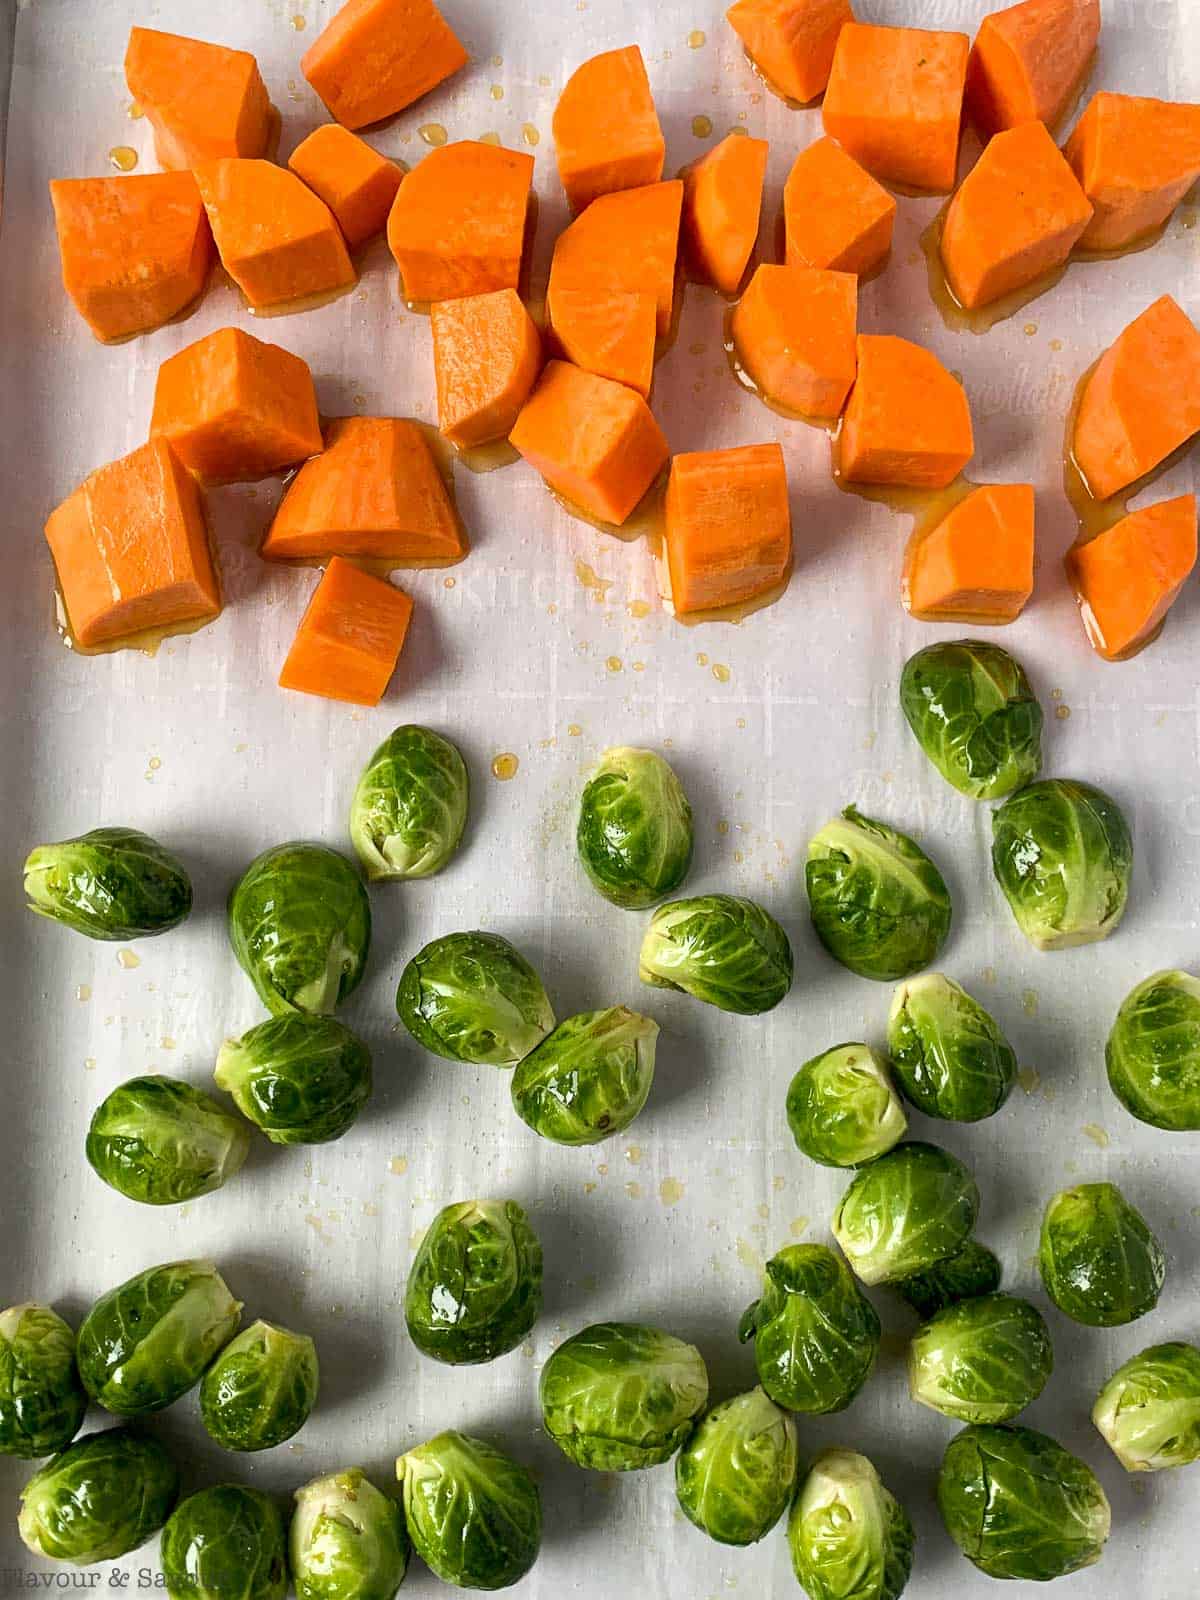 Sweet potatoes and Brussels sprouts on a sheet pan.